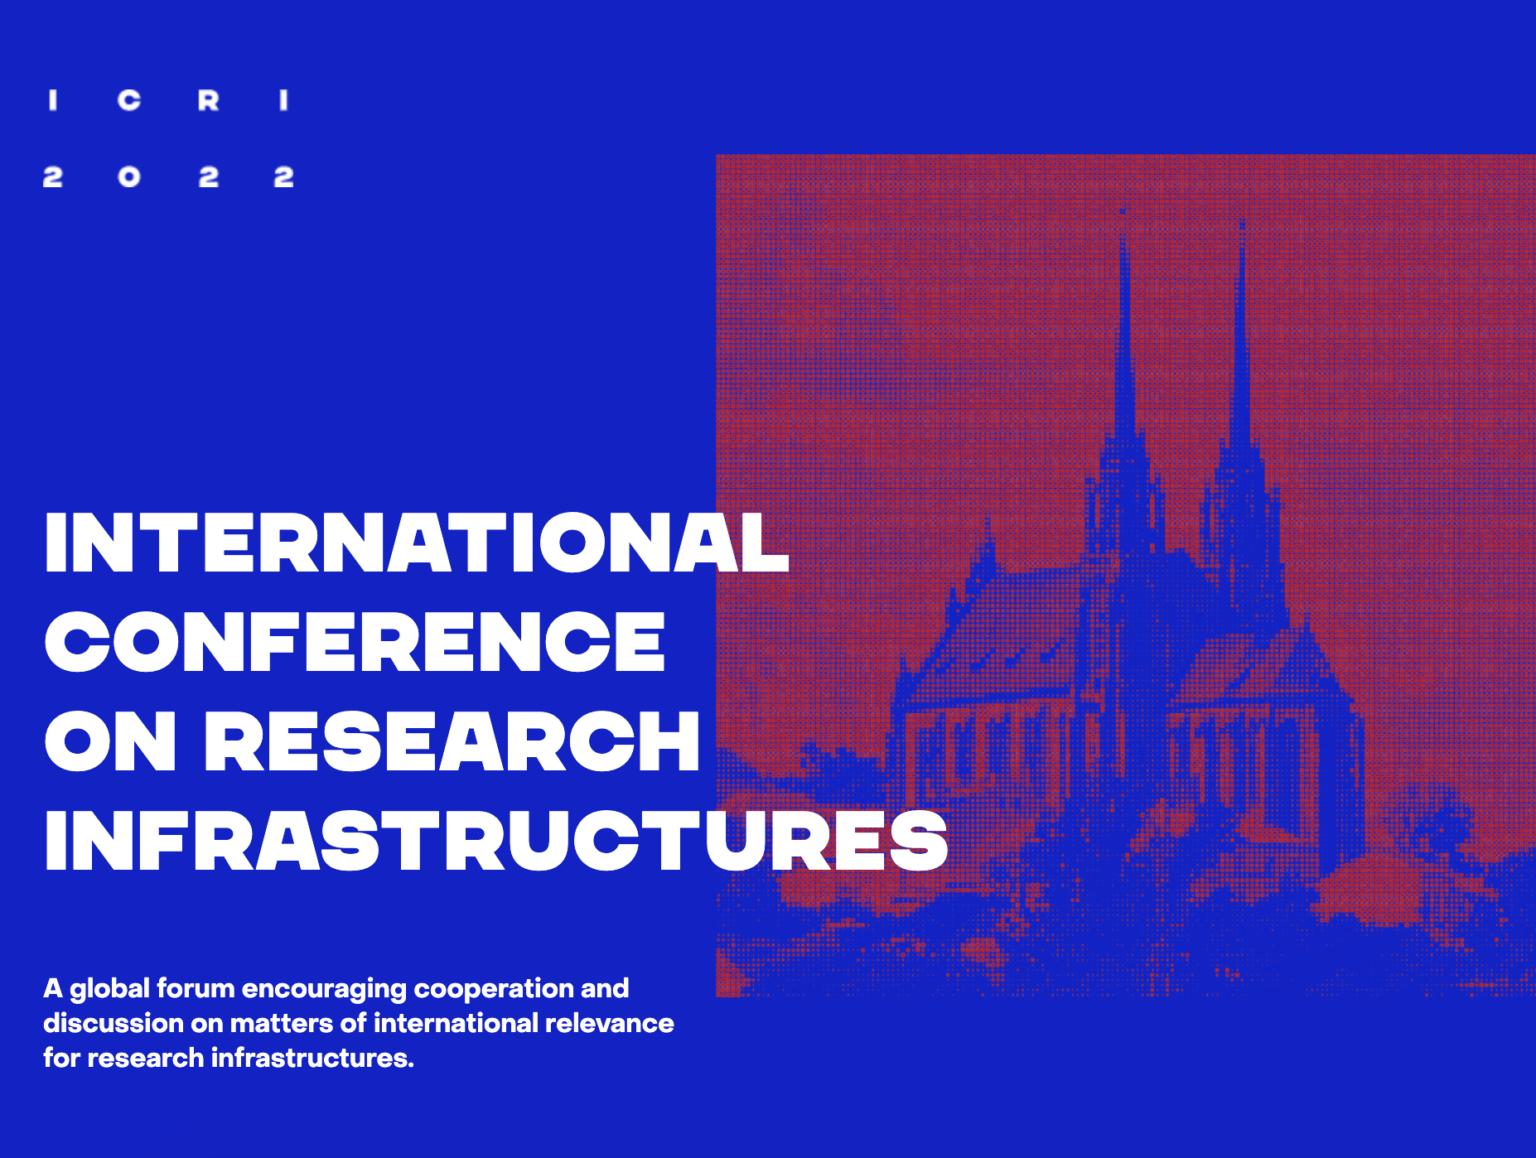 Save the date: 2022 International Conference on Research Infrastructures – Μπρνο, Τσεχία, 19-21 Οκτωβρίου